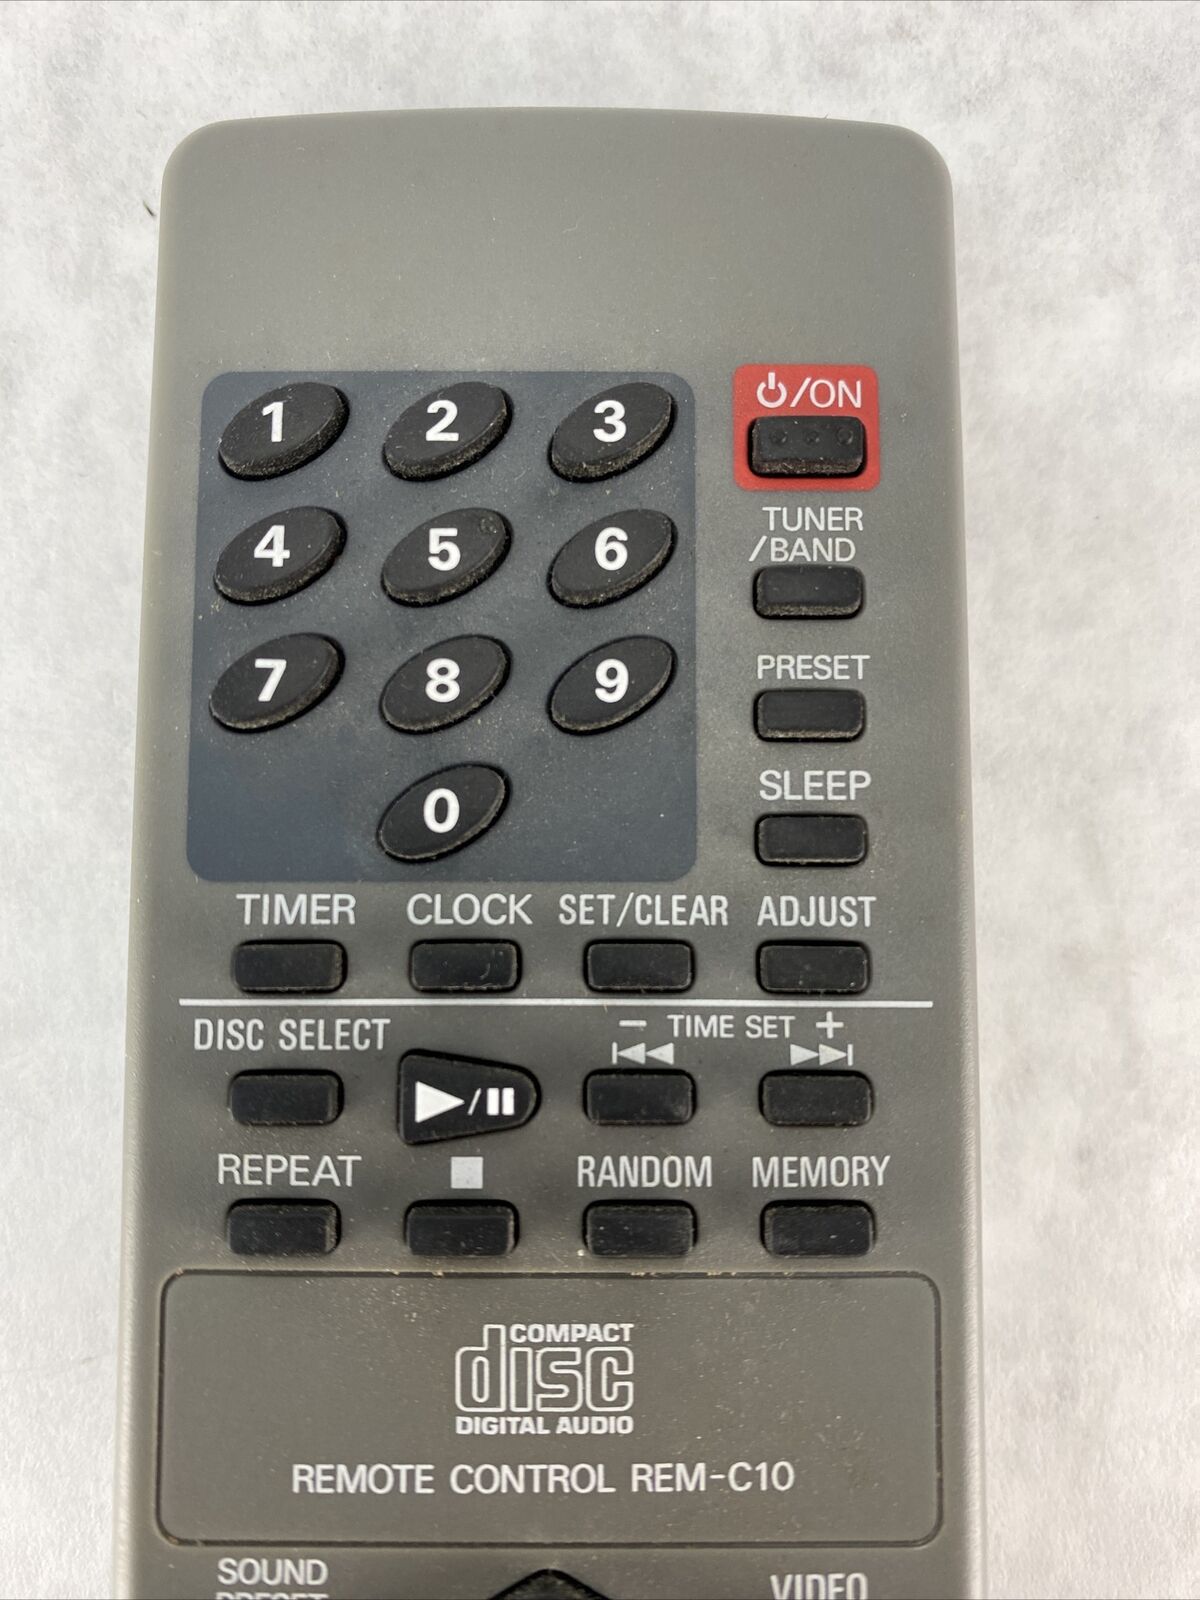 Fisher REM-C10 Remote Control for Fisher TAD-S450 Mini Stereo